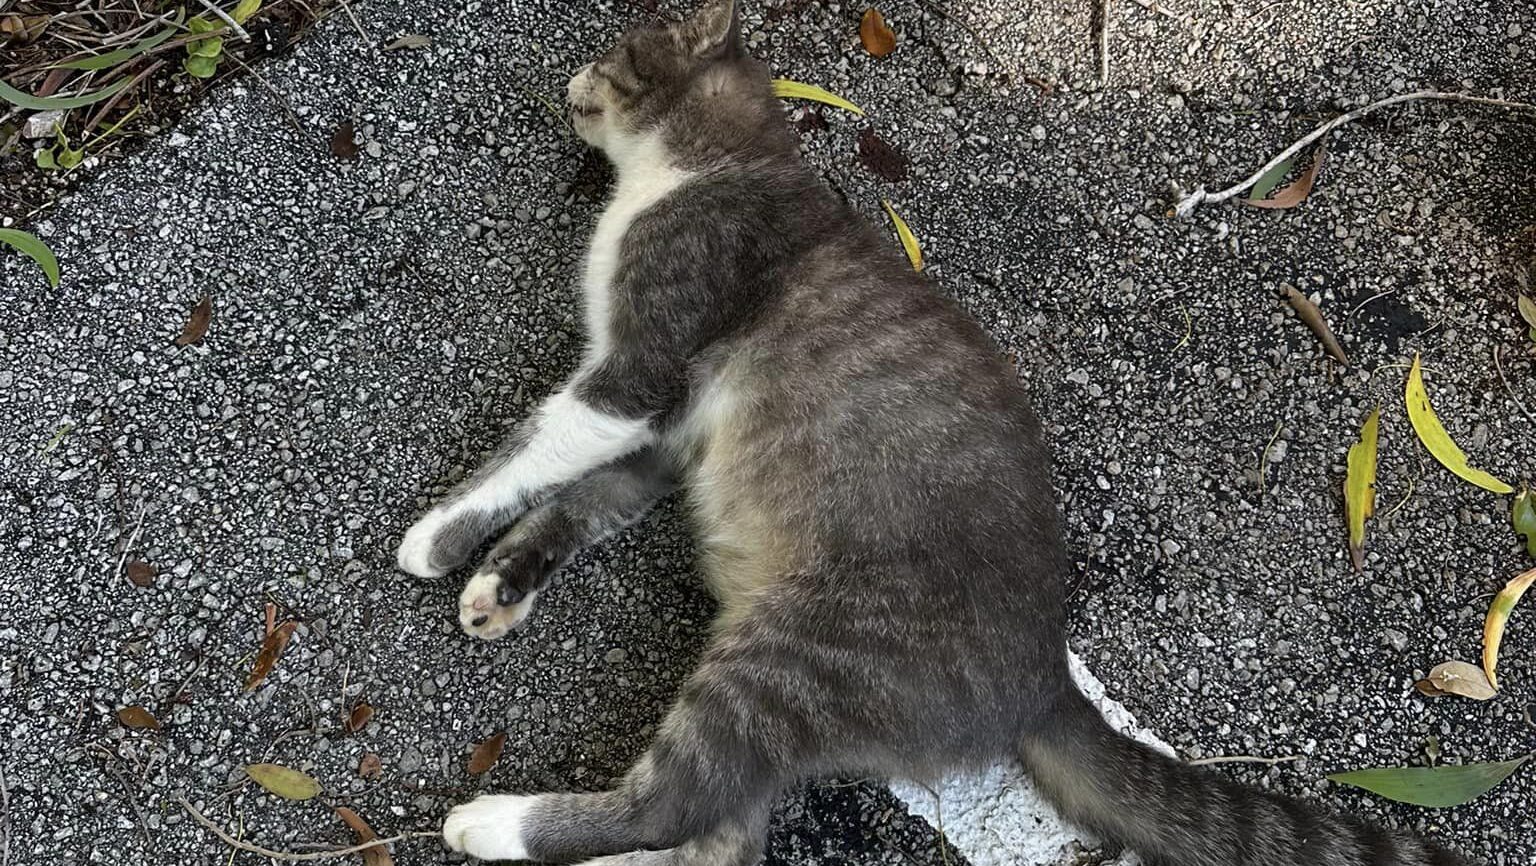 “These are Innocent Animals”: Seven Cats Shot, Three Killed in Tamarac